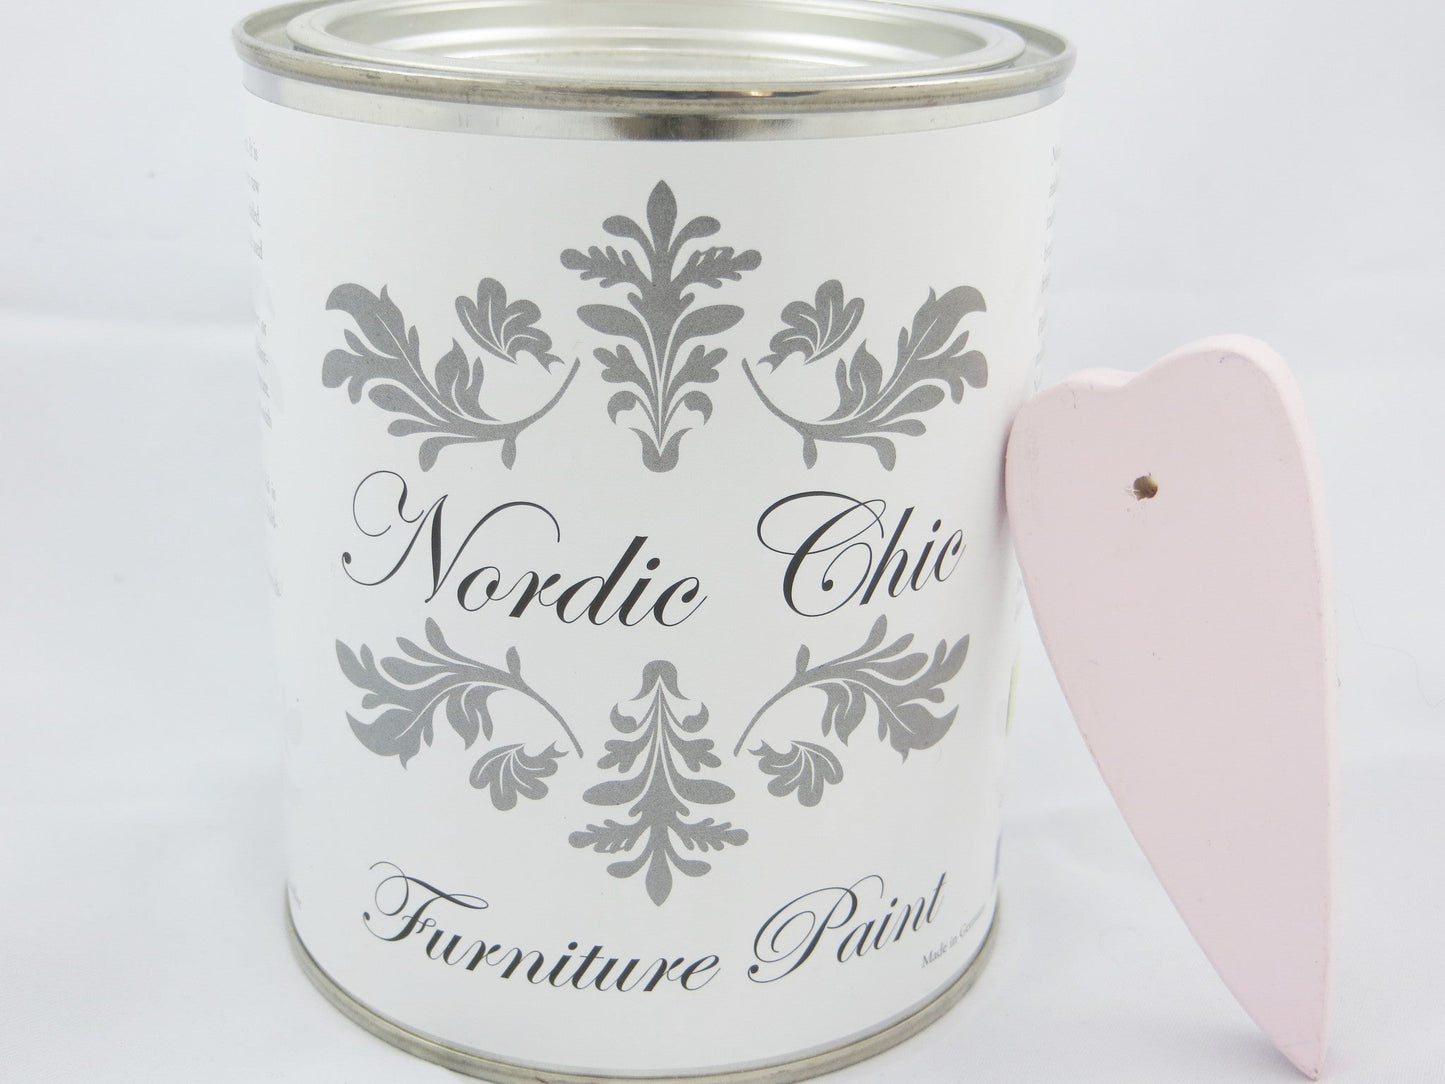 Nordic Chic Furniture Paint - Baby Rose - Nordic Chic®